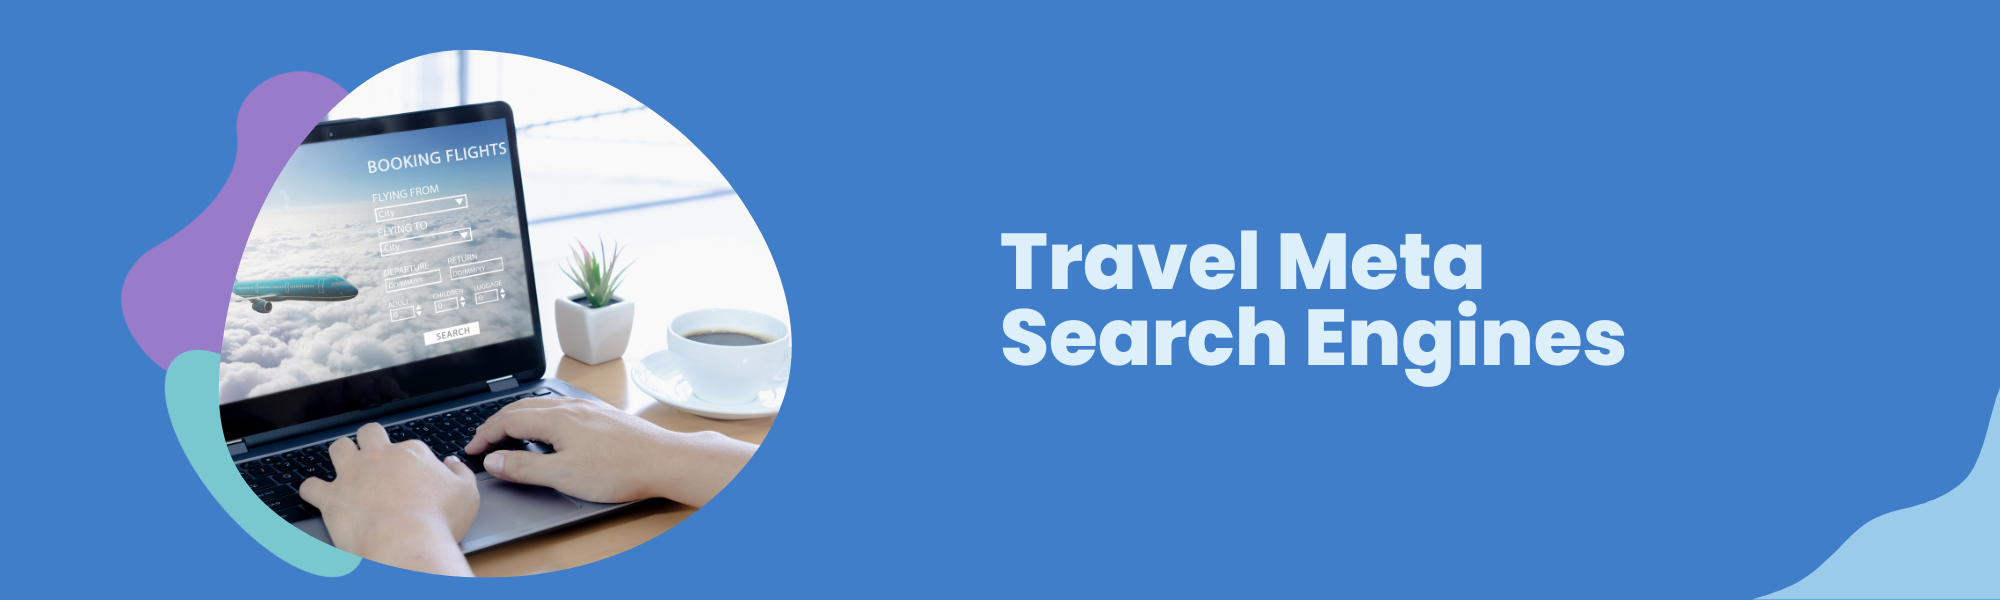 search engines for travel industry